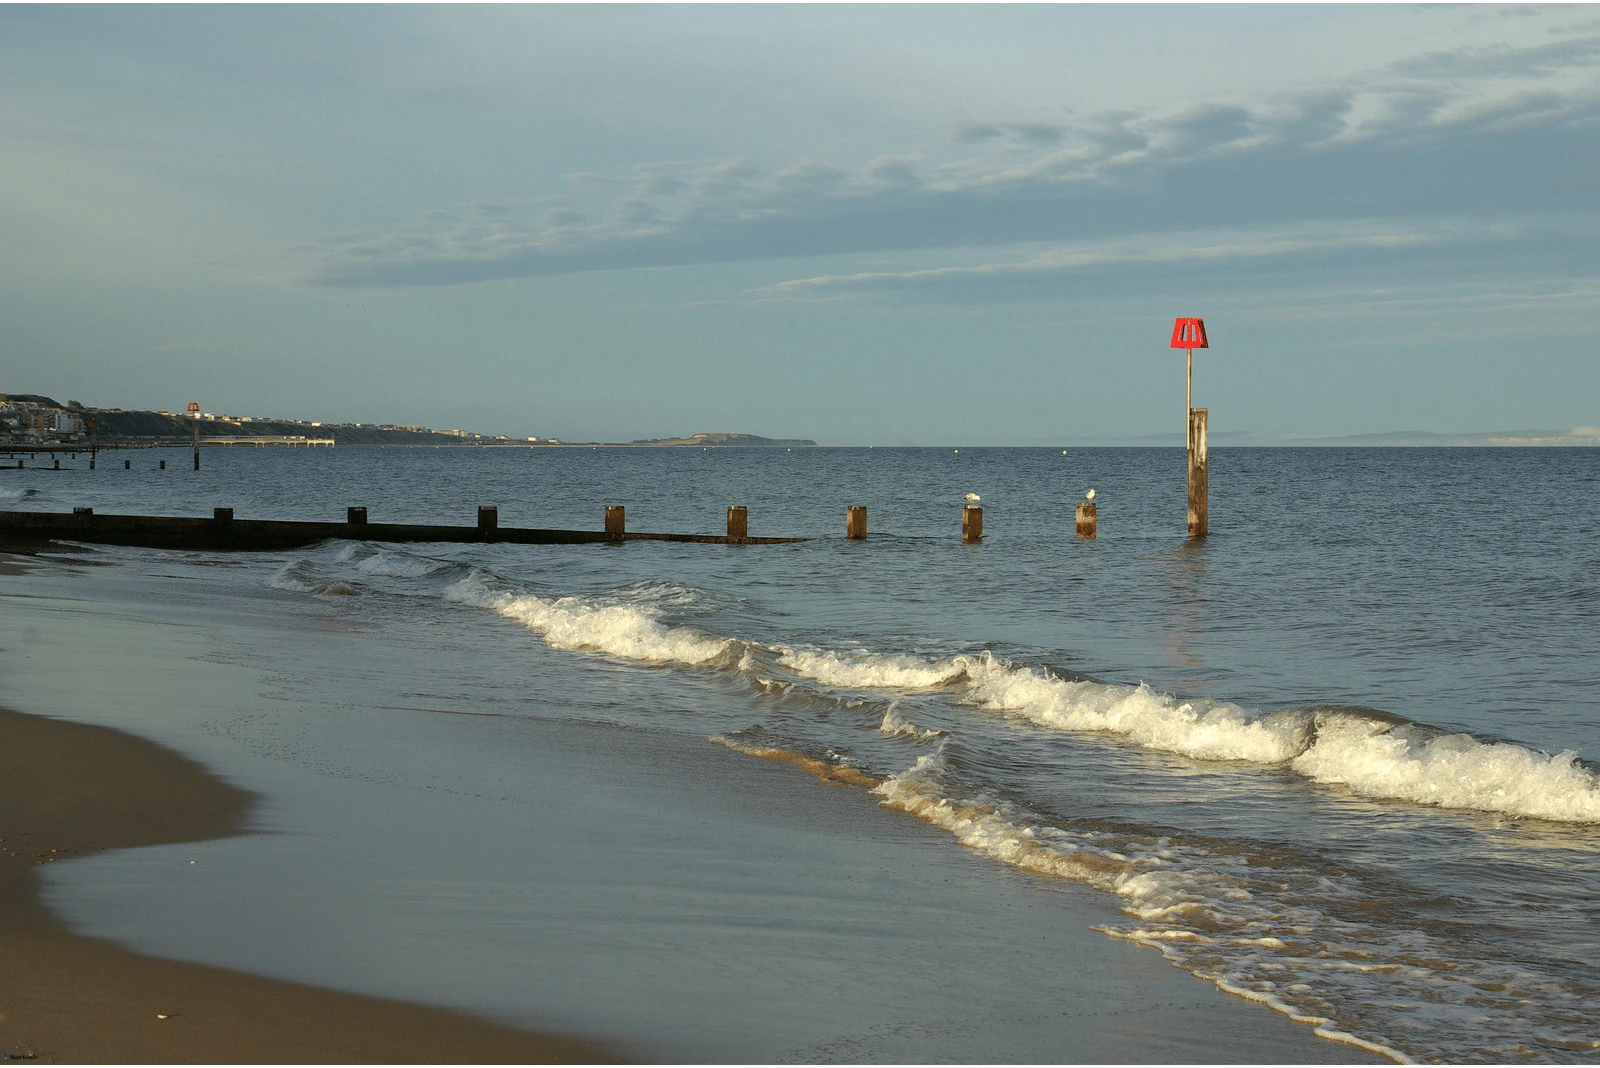 More Leads Local at Durley Chine Beach - enhancing local businesses in Bournemouth with the power of SEO.